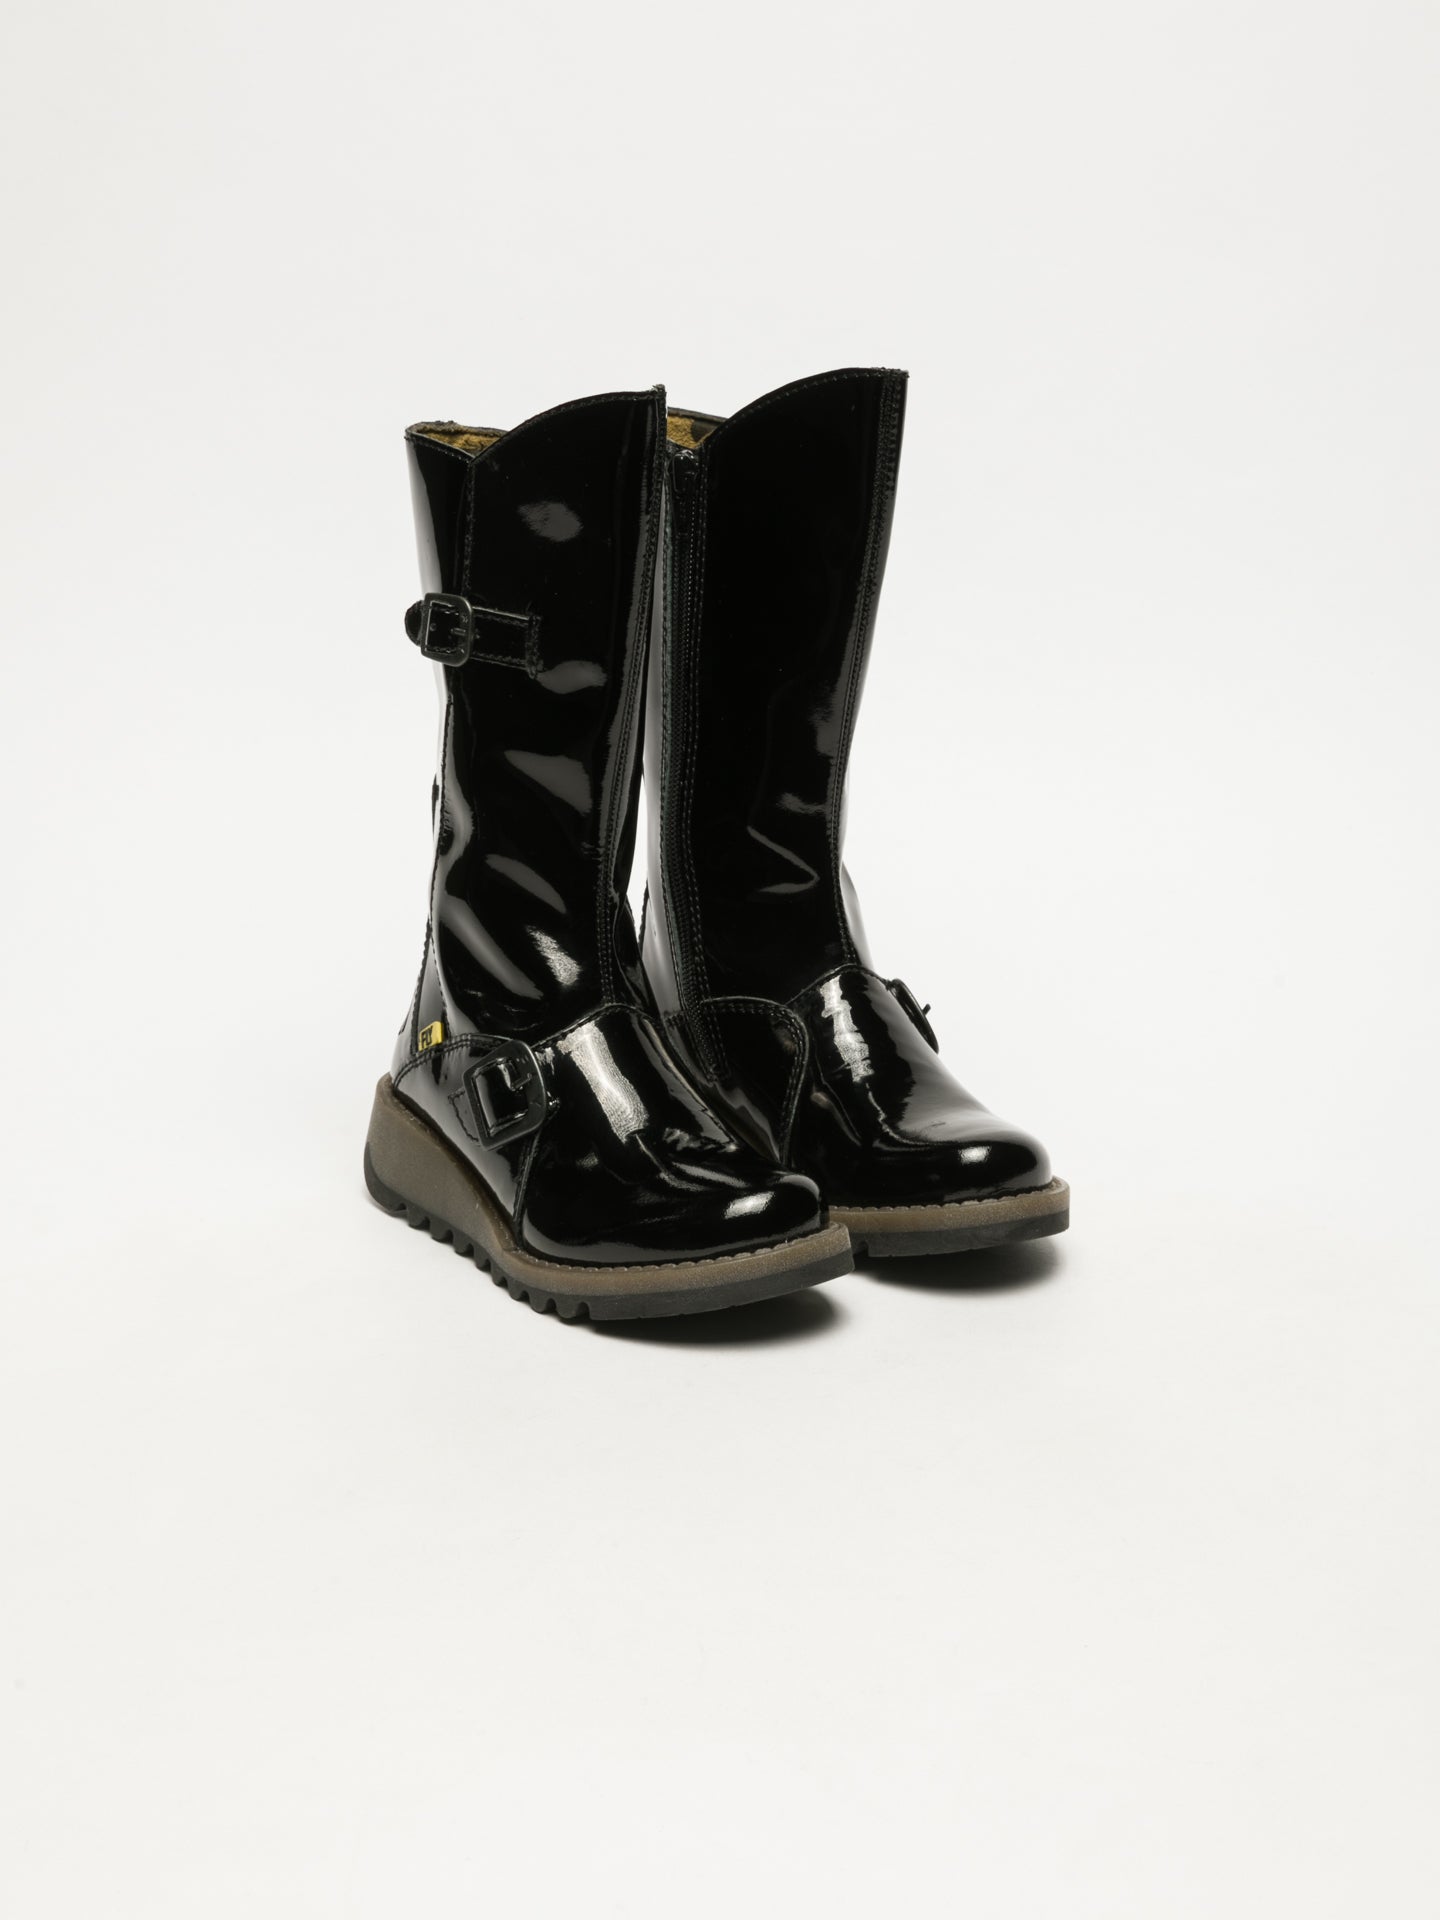 Fly London Coal Black Buckle Boots